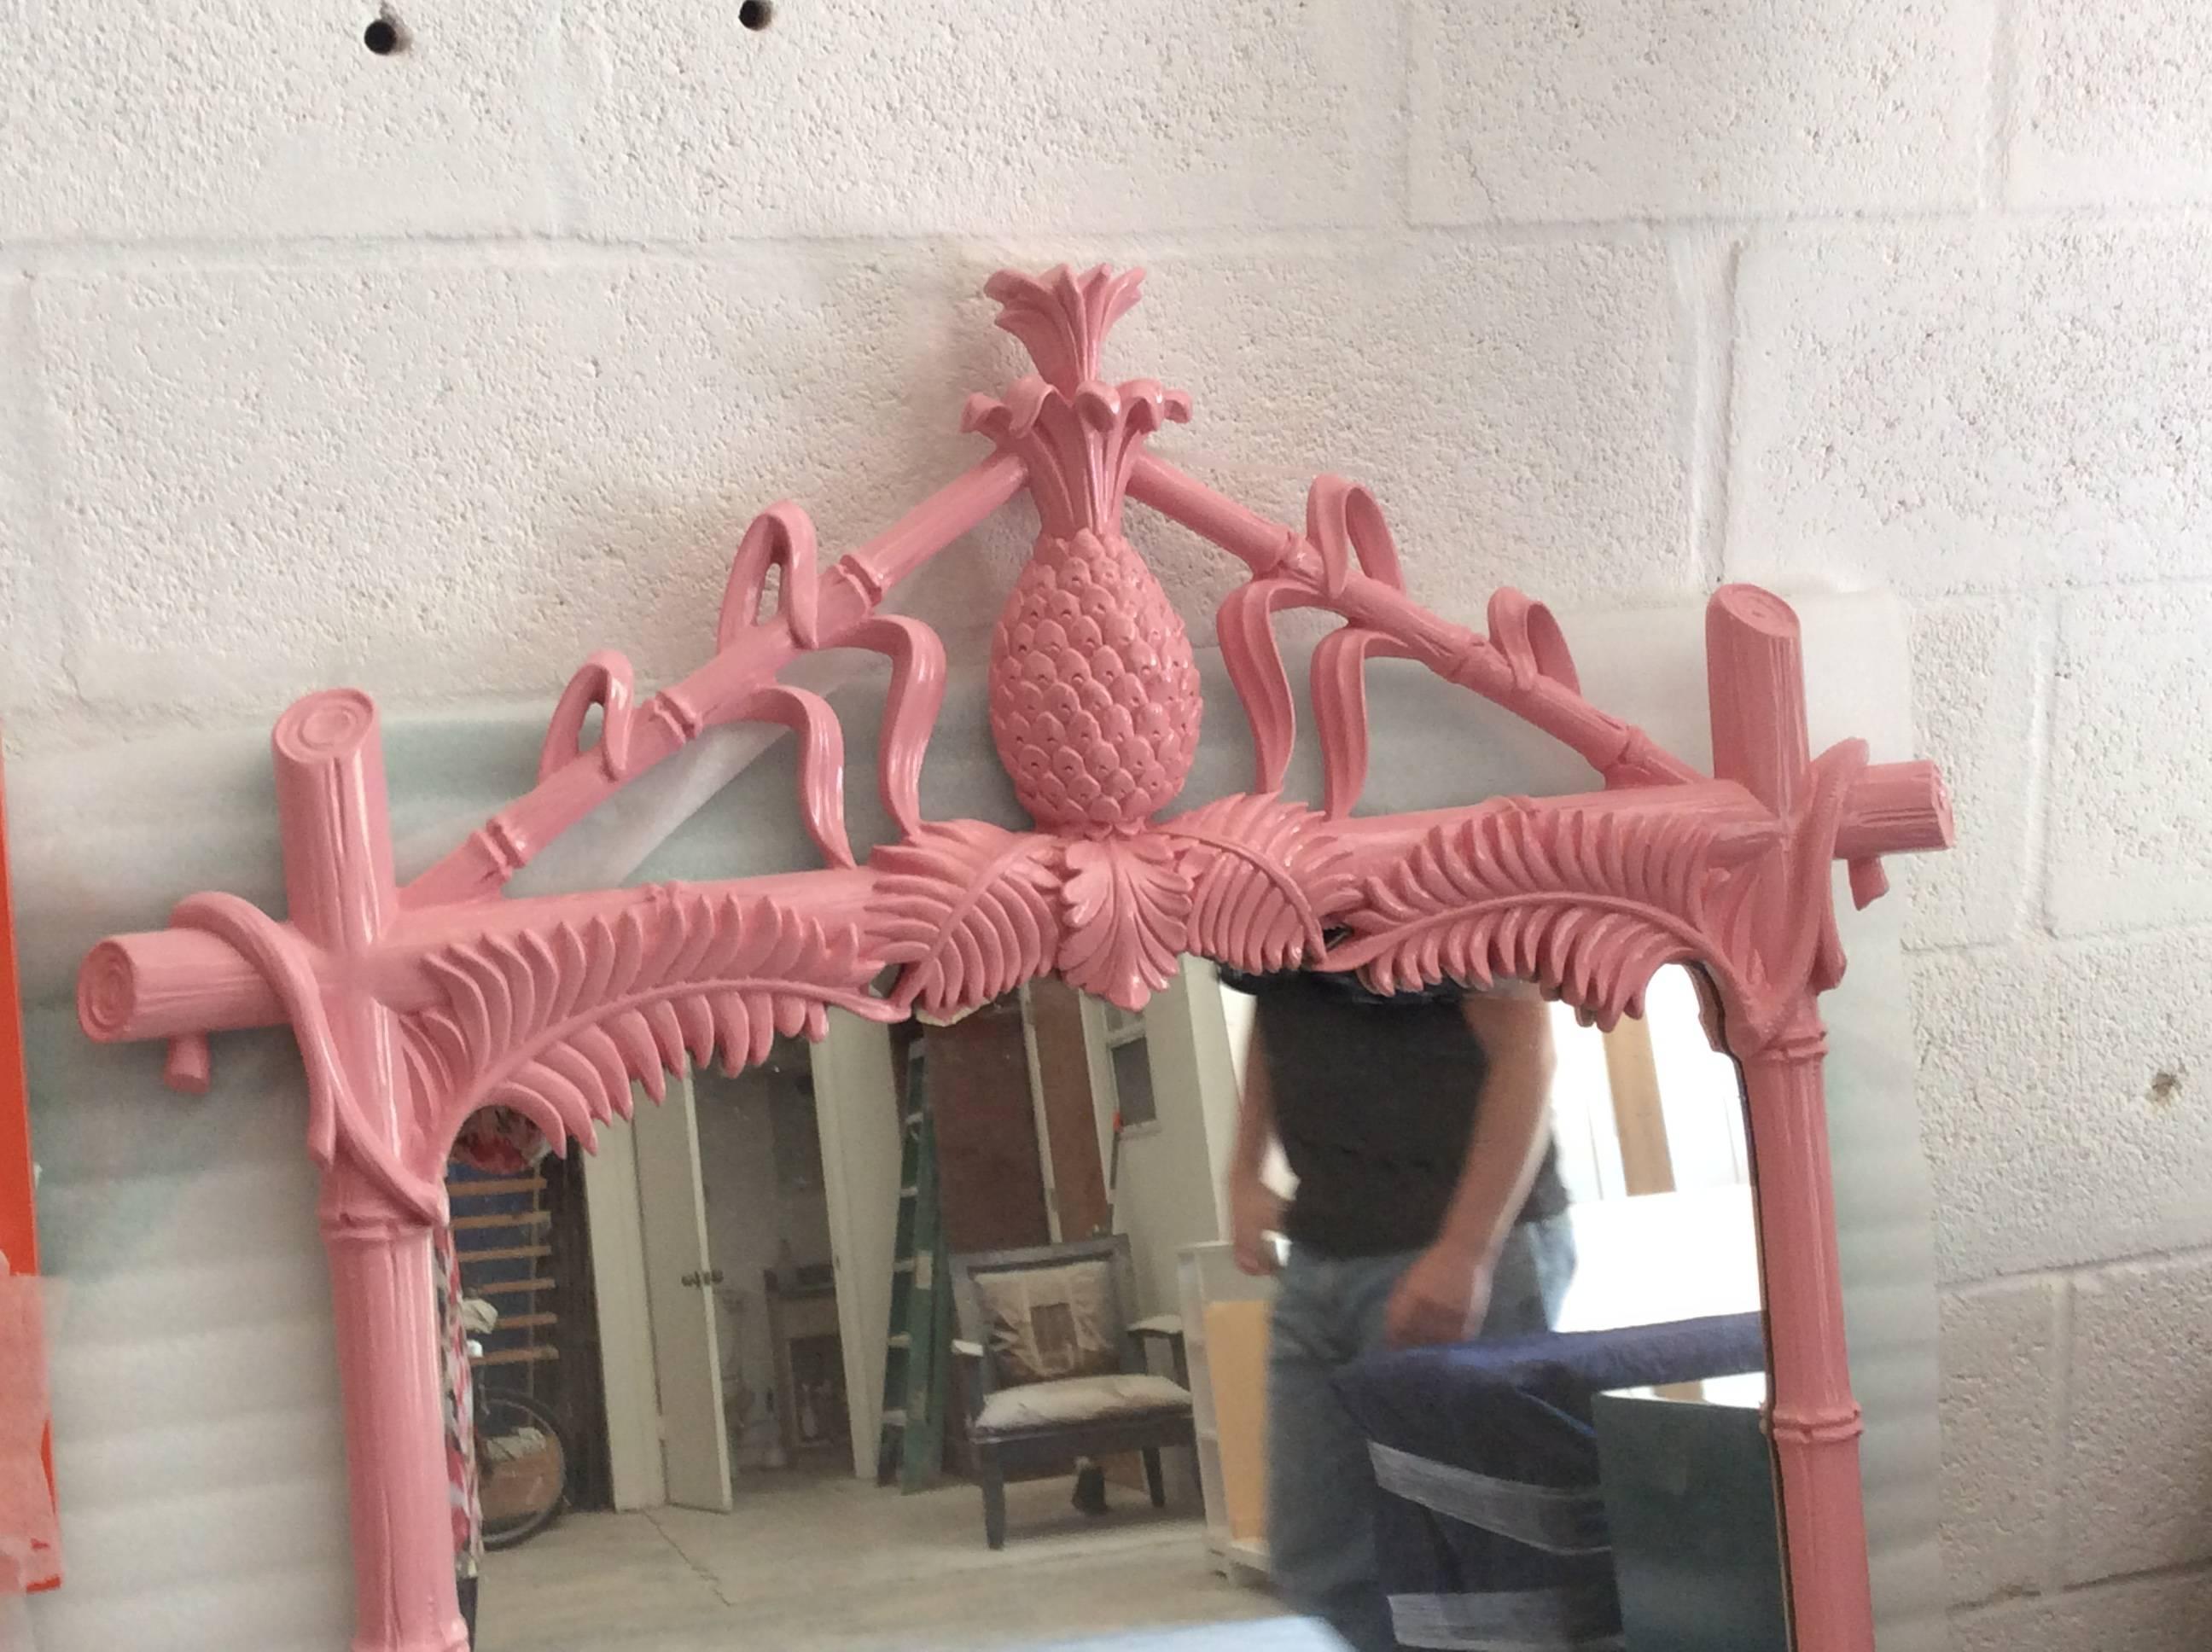 The most amazing vintage Hollywood Regency, chinoiserie wall mirror by Gampel & Stoll newly lacquered in a flamingo pink color. Faux bamboo, Chinese Chippendale, pineapple top and palm frond leaves add to the tropical Palm Beach, Lily Pulitzer flair